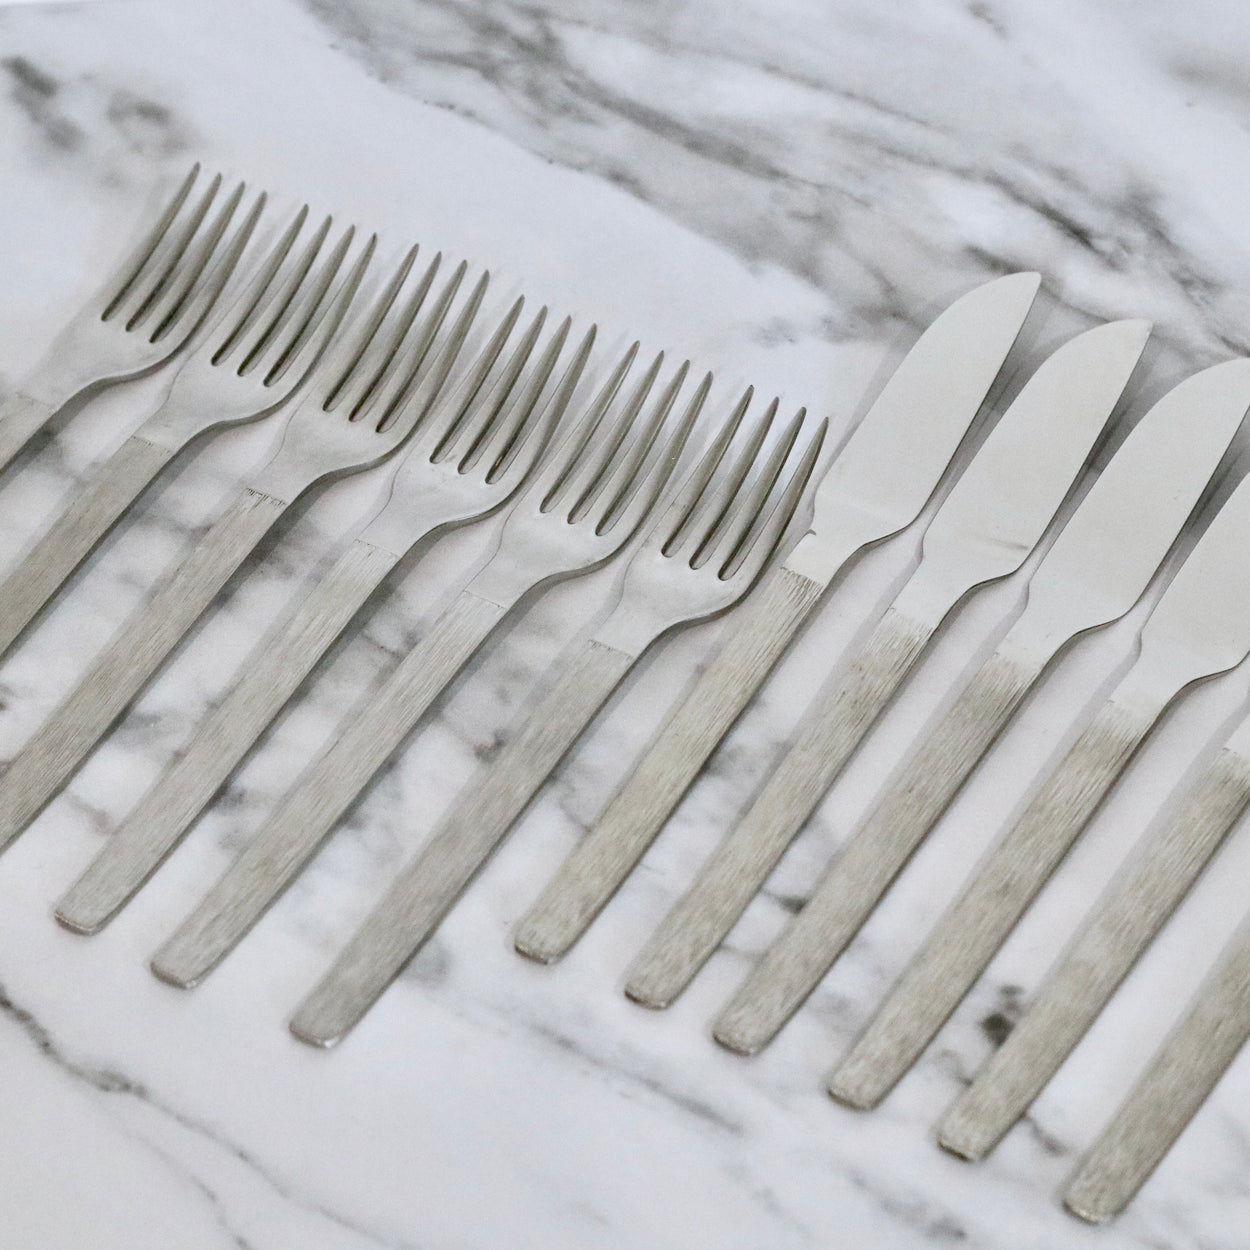 Vintage set of stainless steel flatware against a marble background.